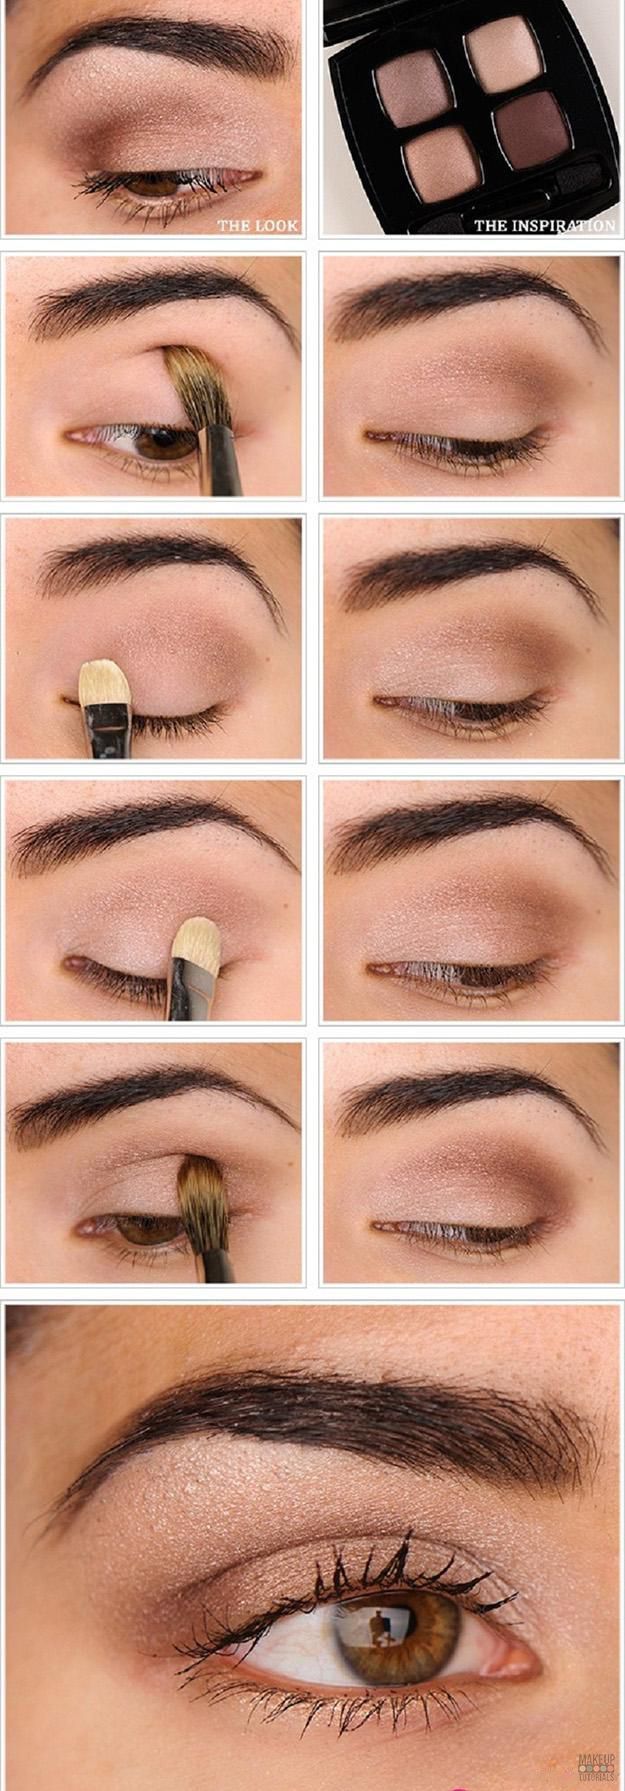 Eyeshadow Tutorial: How To Do Everyday Natural Makeup. DIY simple and quick tuto...